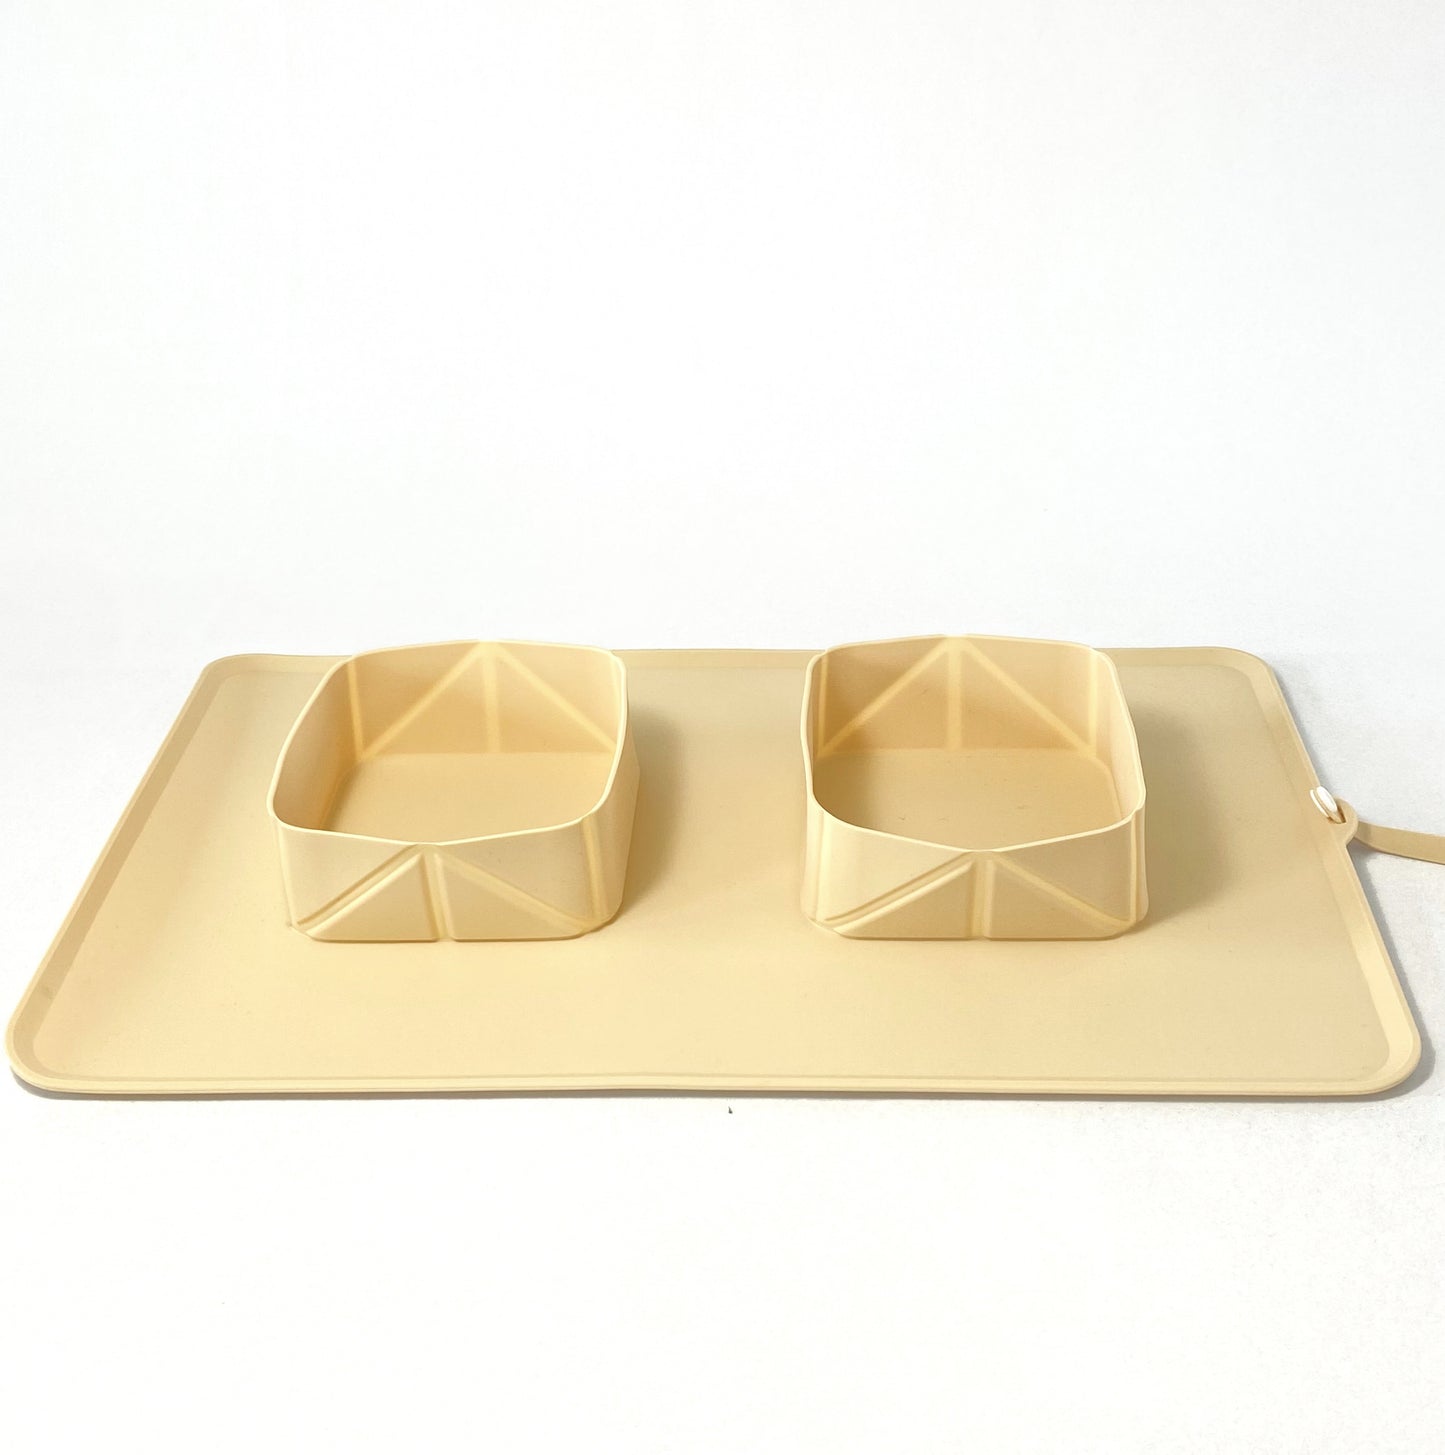 Travel Portable Foldable Silicone Dog Bowls for Food and Water with Placemat - Beige